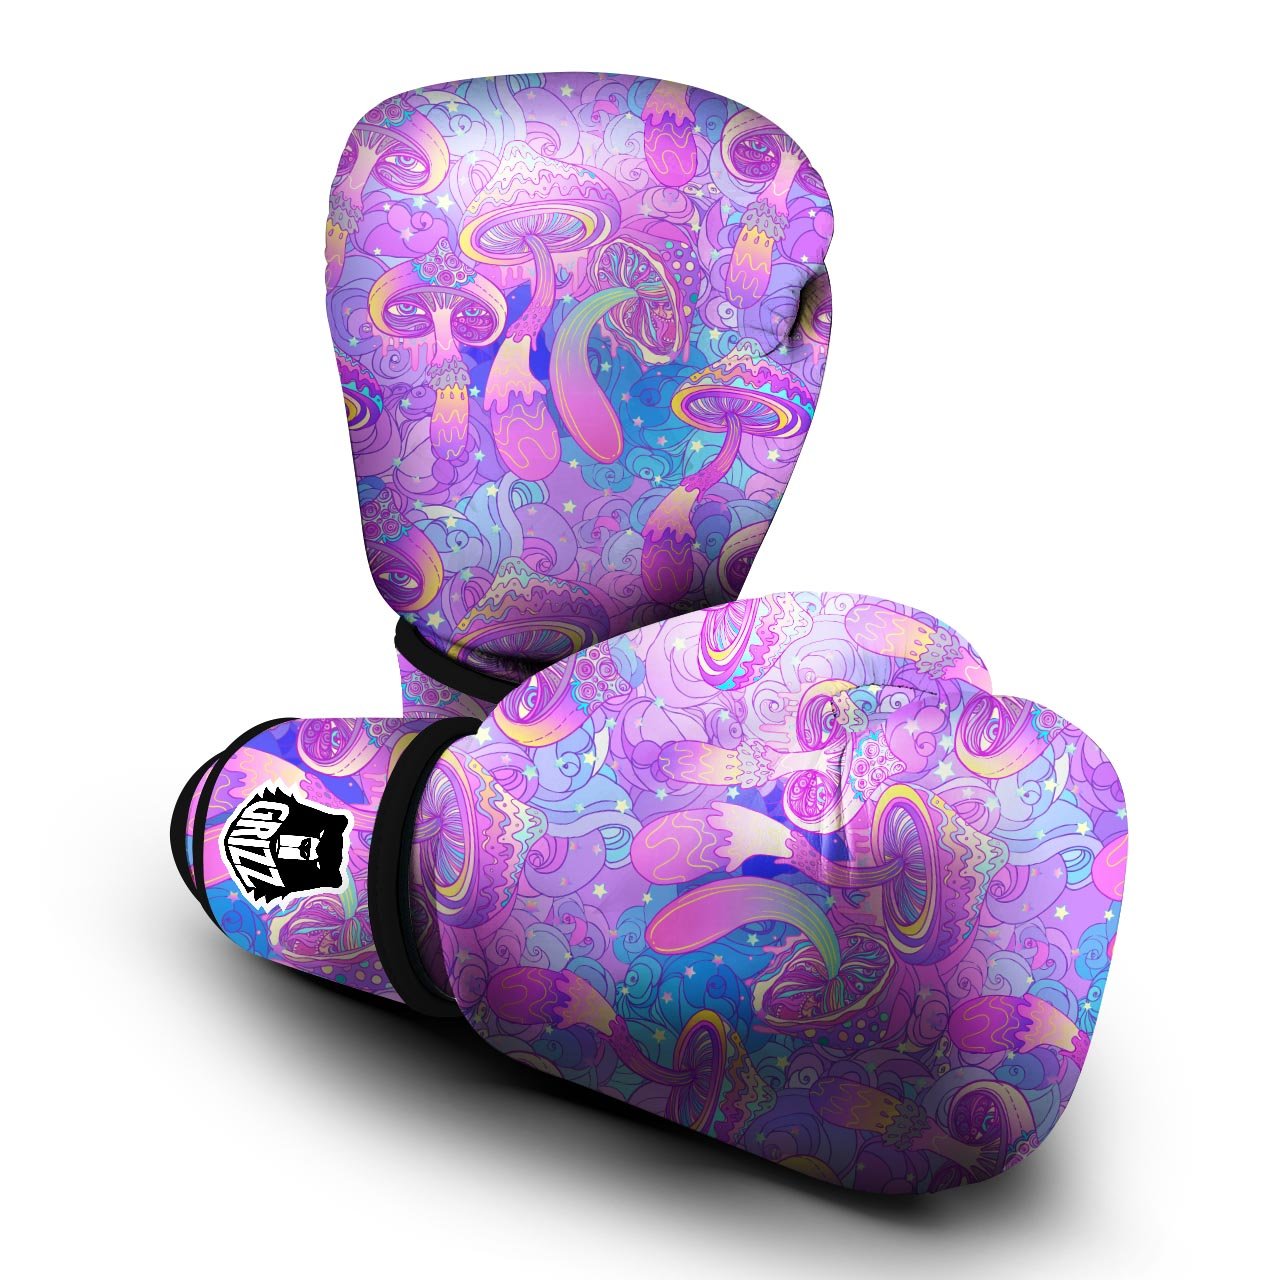 Mushroom Psychedelic Trippy Boxing Gloves-grizzshop